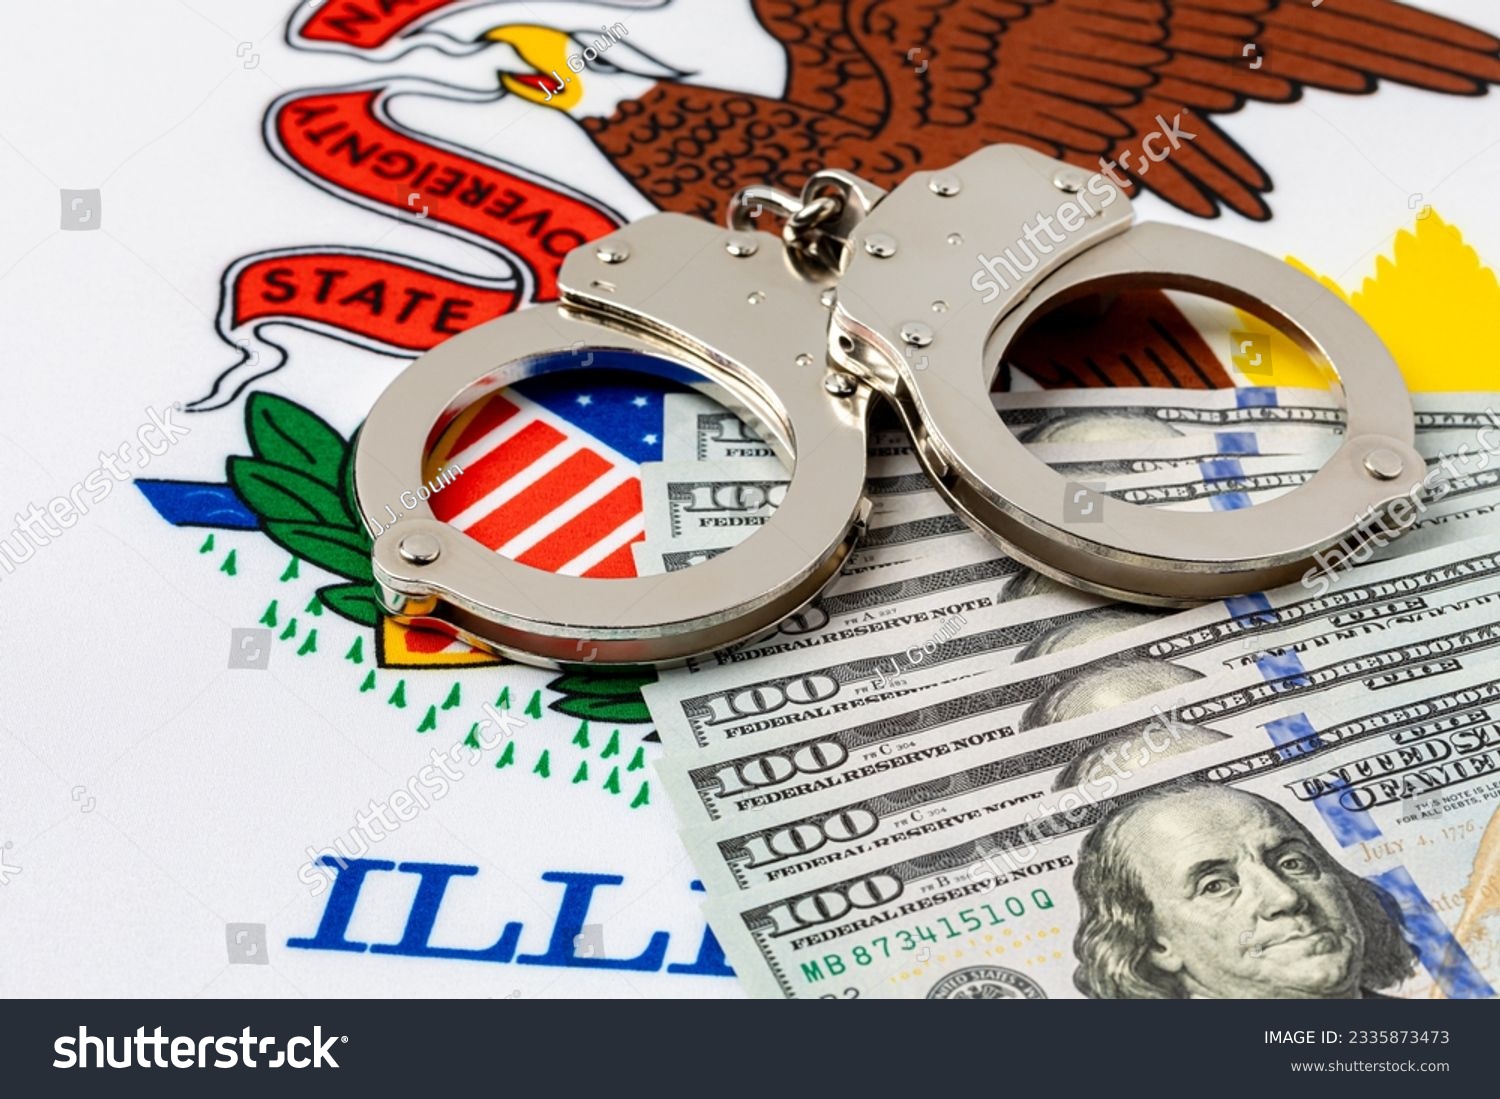 Handcuffs with cash money and Illinois state flag. Cash bail reform, bail bond and cashless bail concept. #2335873473